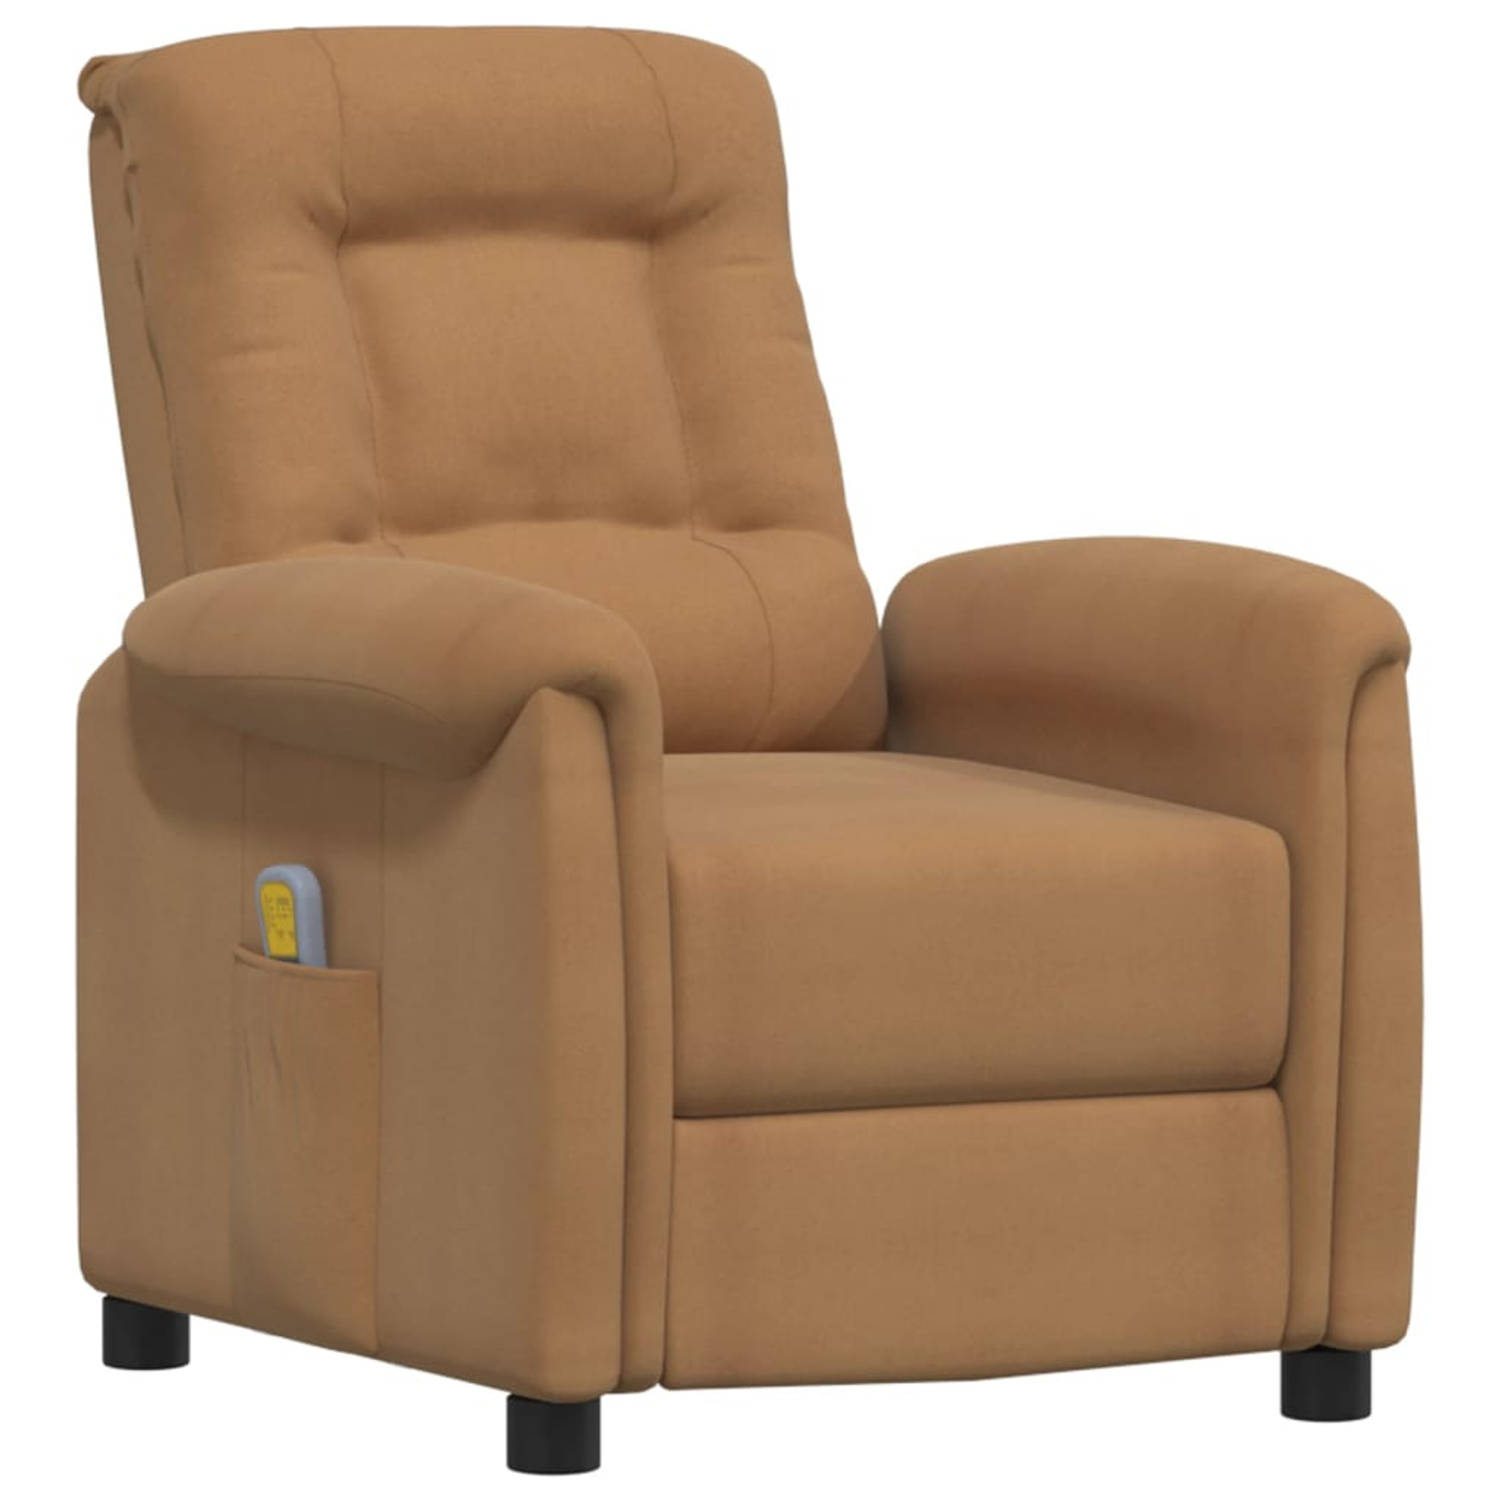 The Living Store Massagestoel microvezelstof taupe - Fauteuil